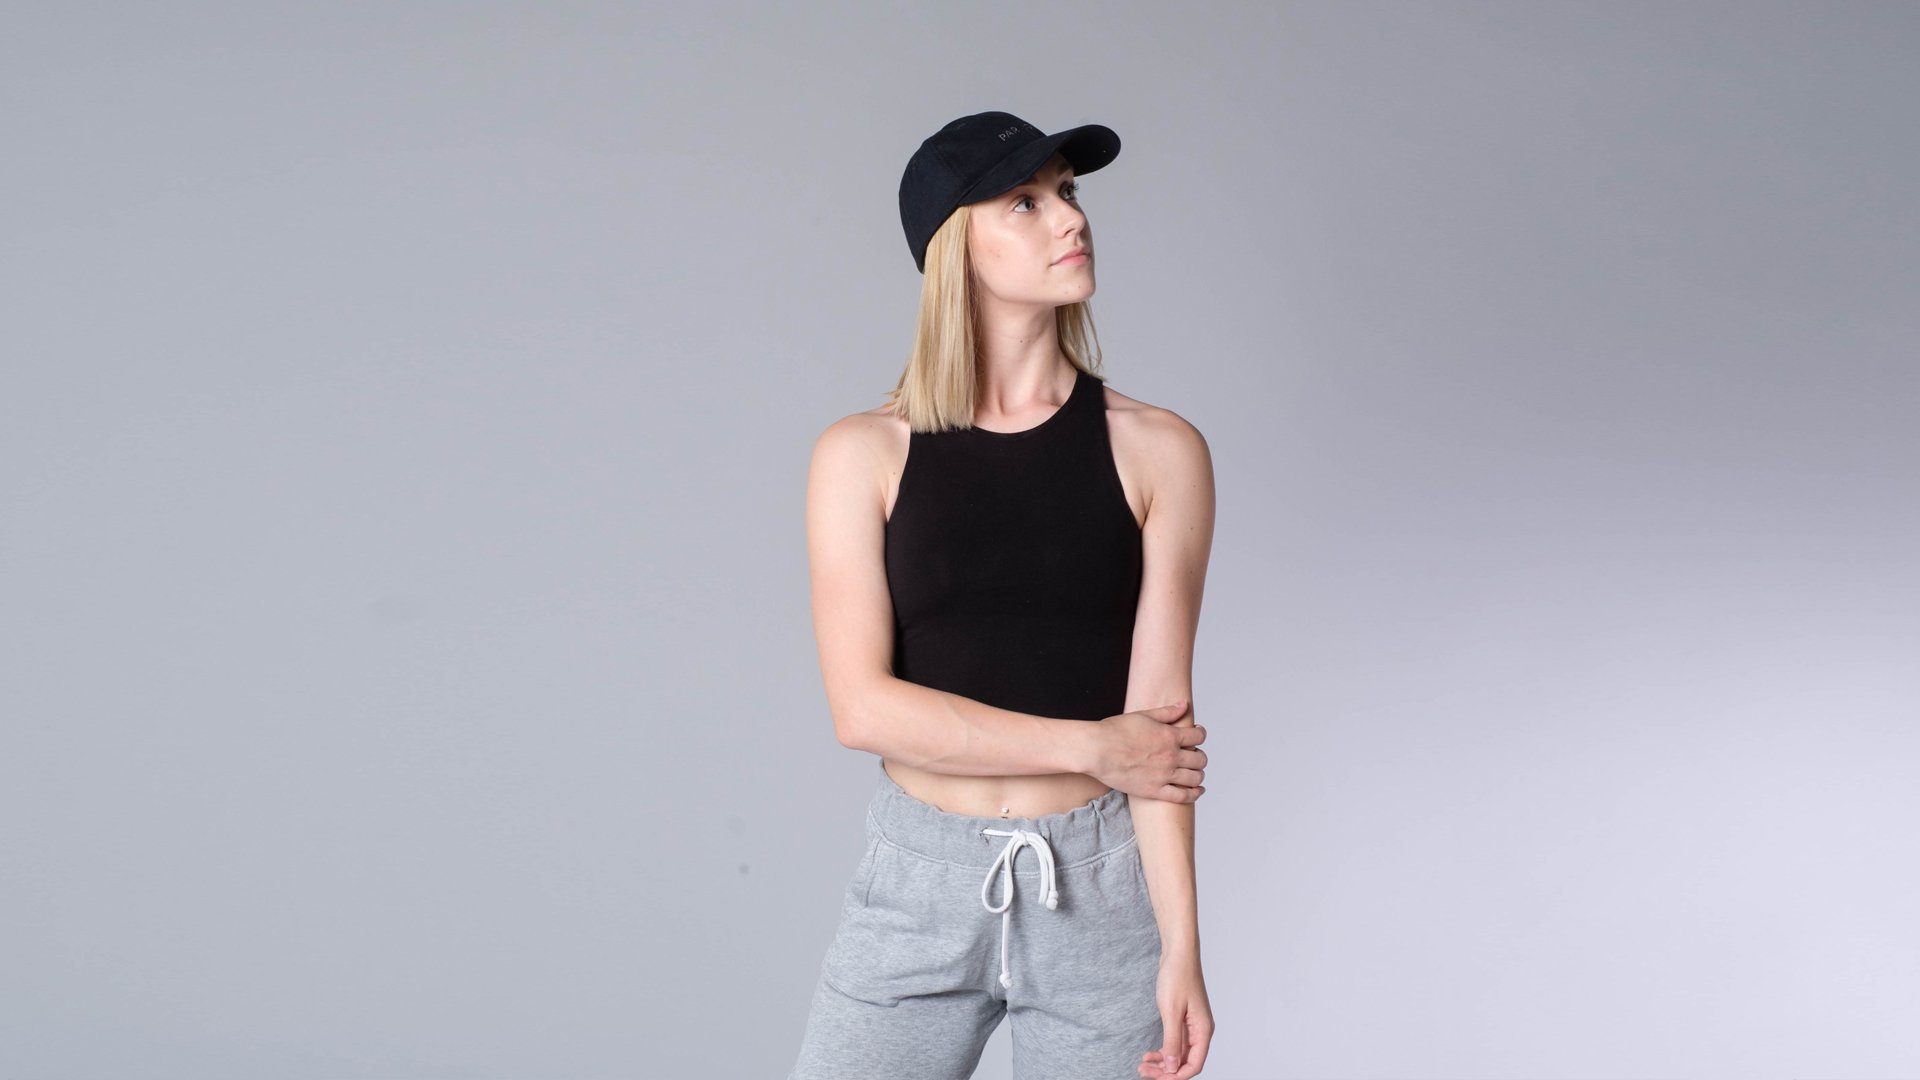 HOW TO STYLE THE ATHLEISURE TREND